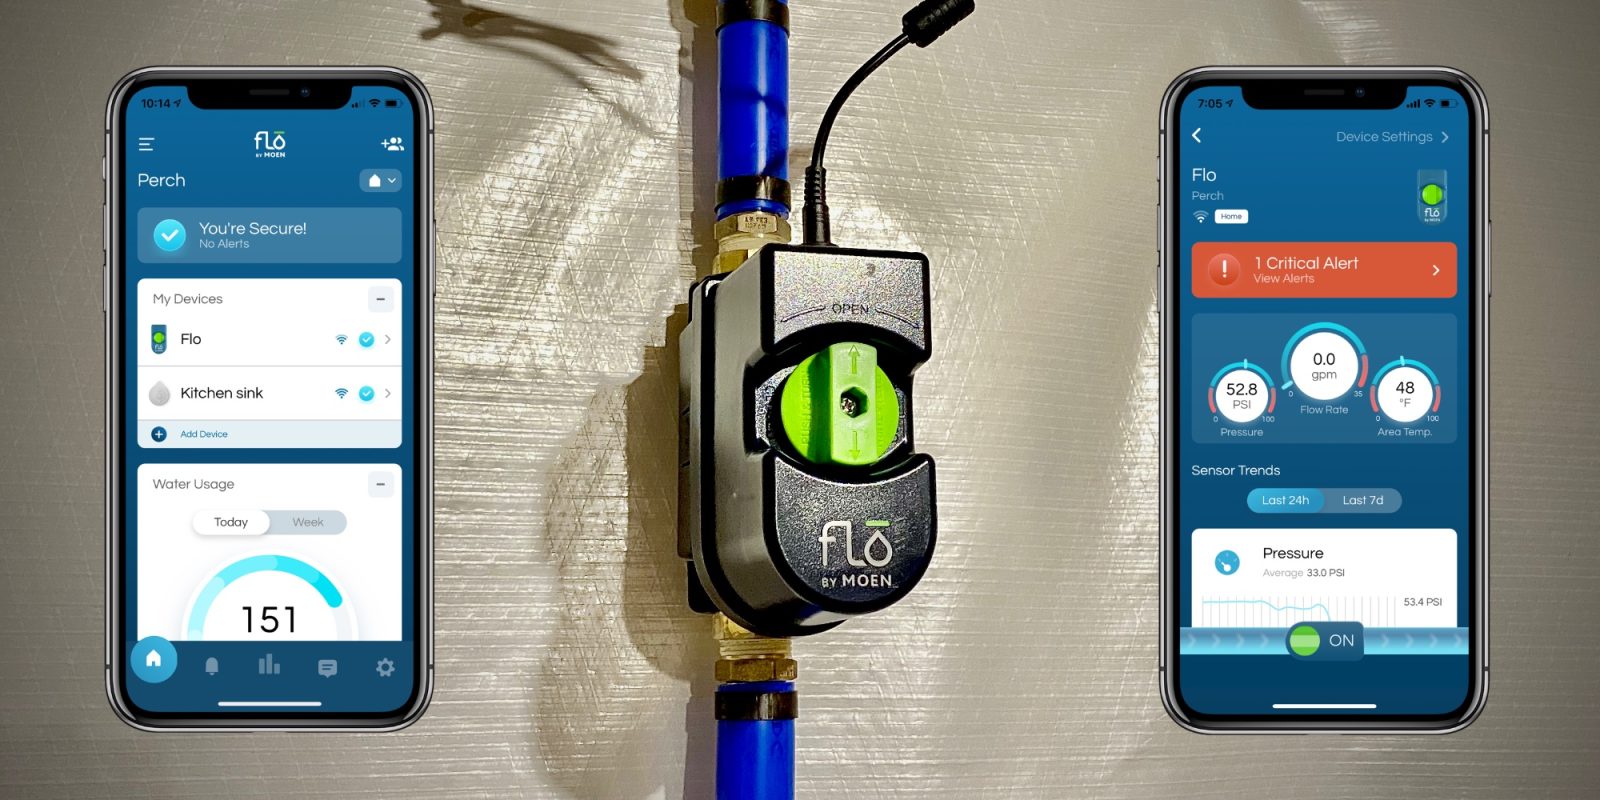 Forthcoming iPhone Car Key component detailed in iOS 13.6 protection screens